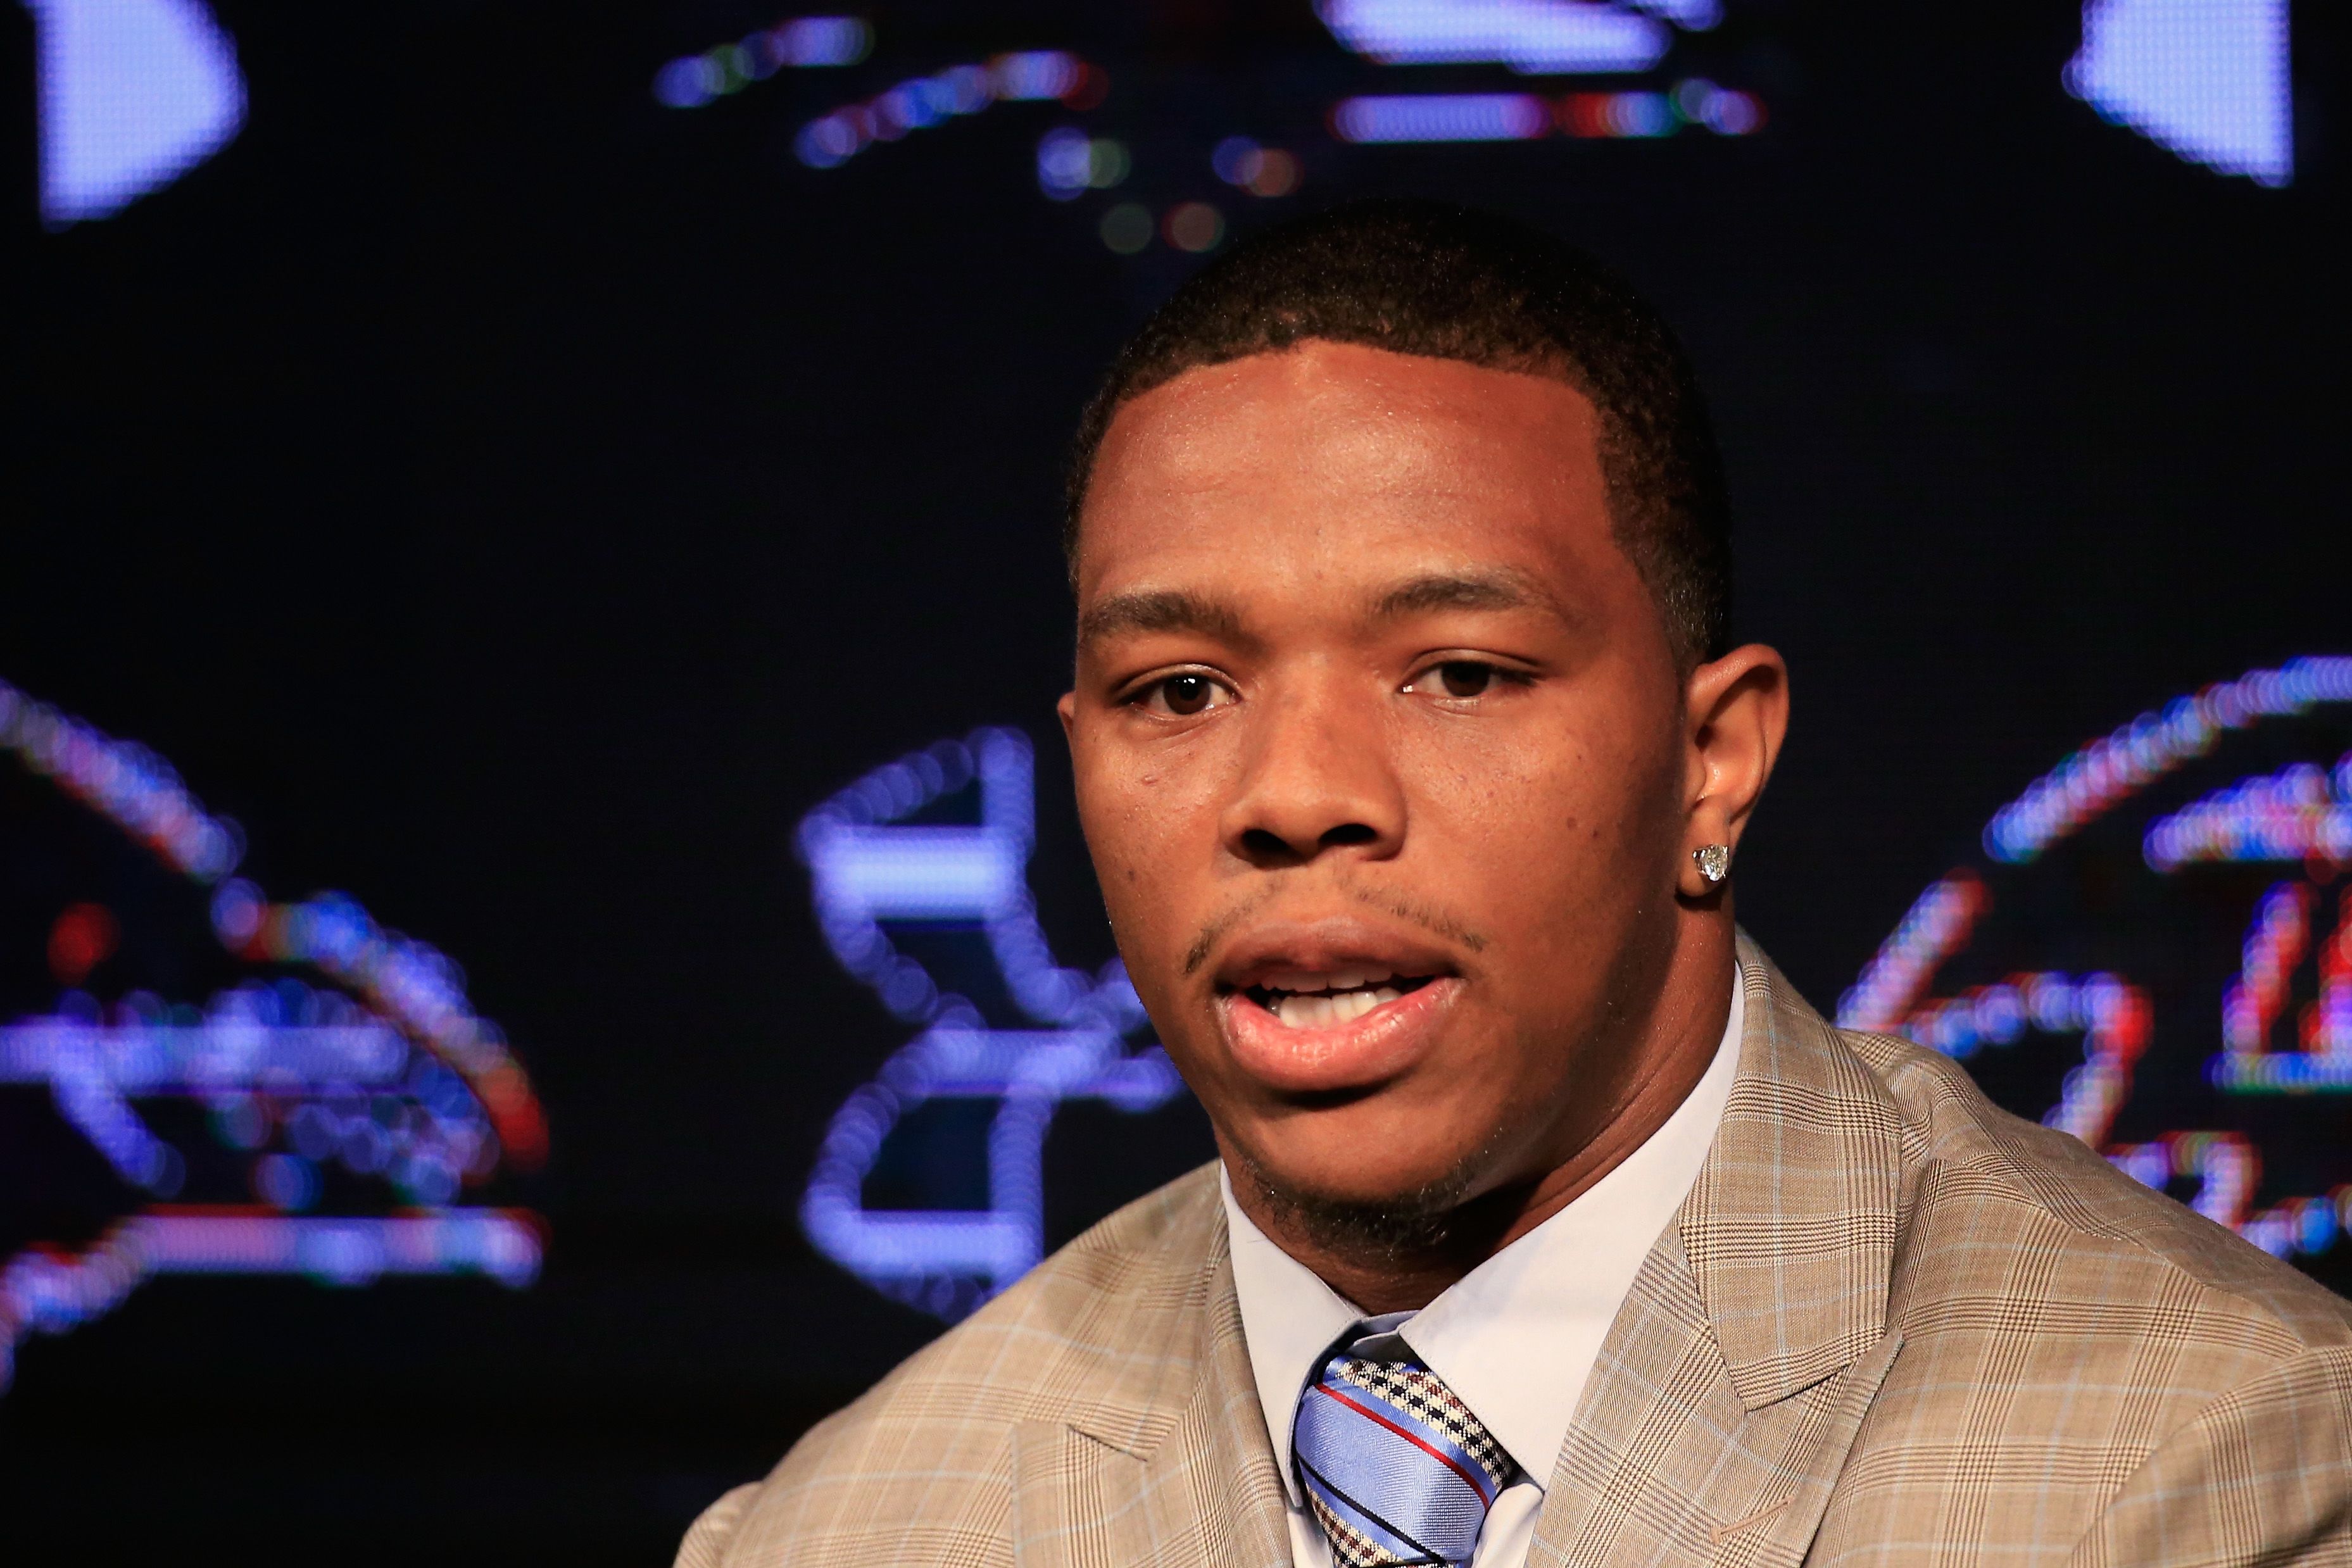 Ray Rice suspended after video shows star's punch |